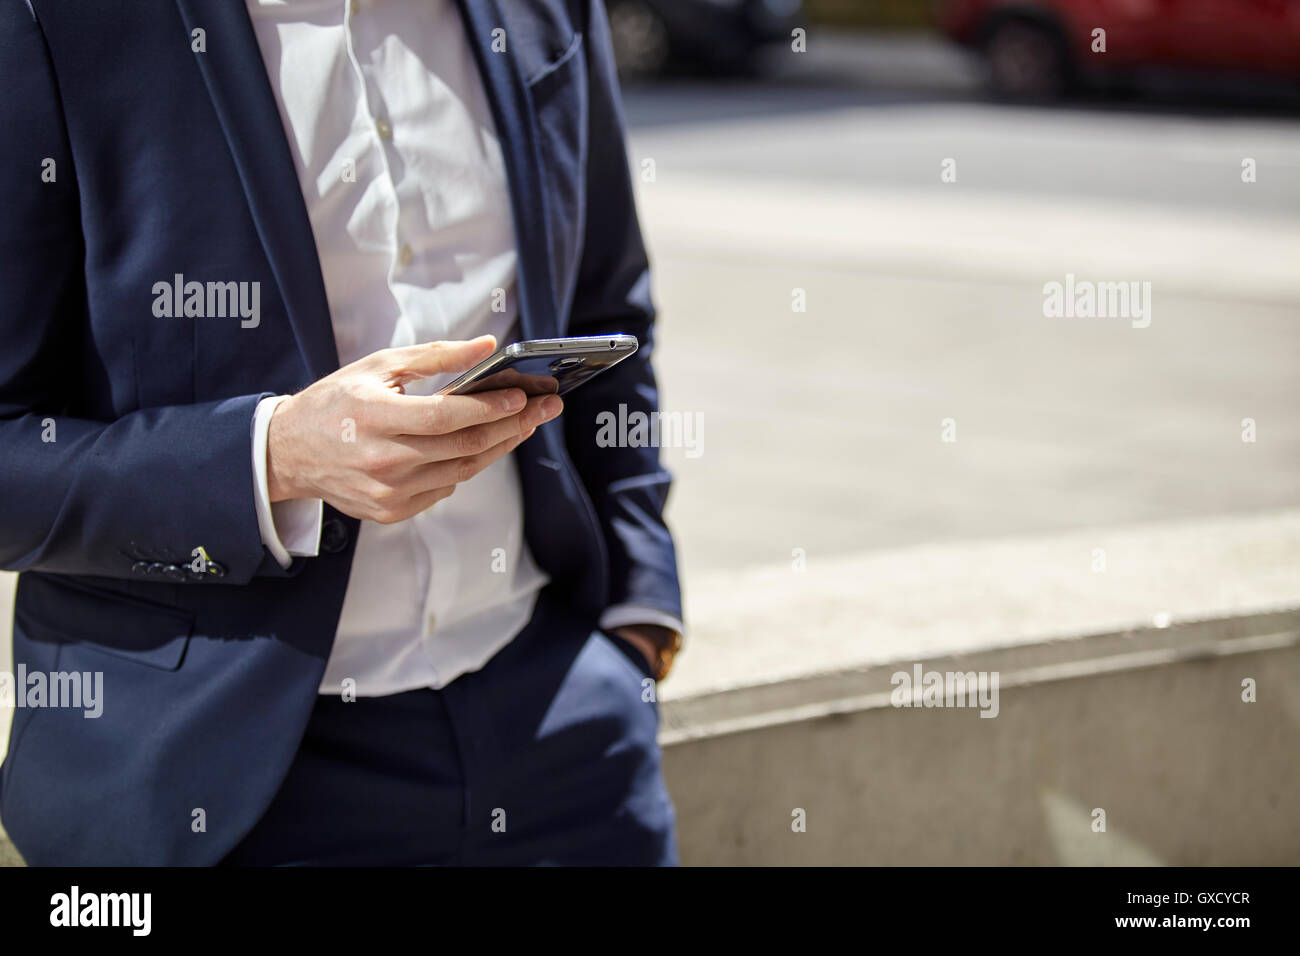 Mid section of businessman texting on smartphone in city Banque D'Images